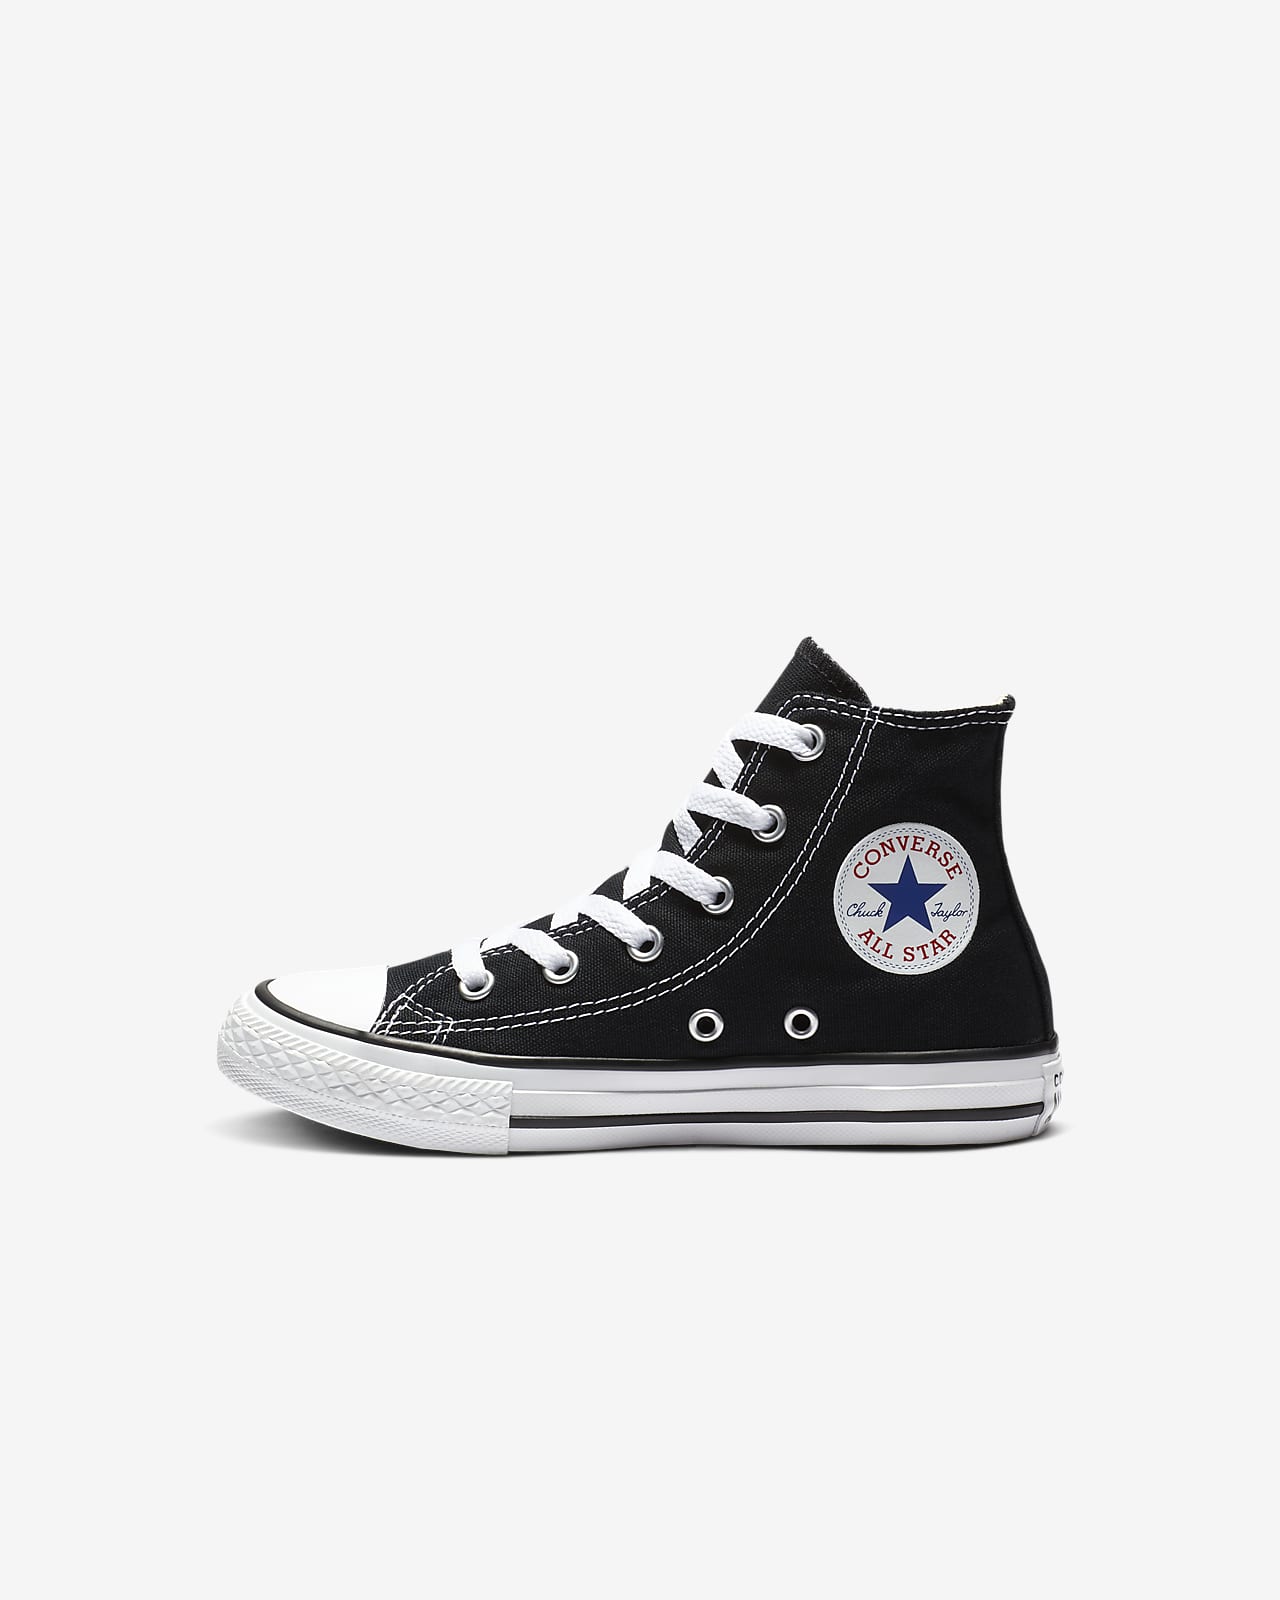 converse all star kids shoes